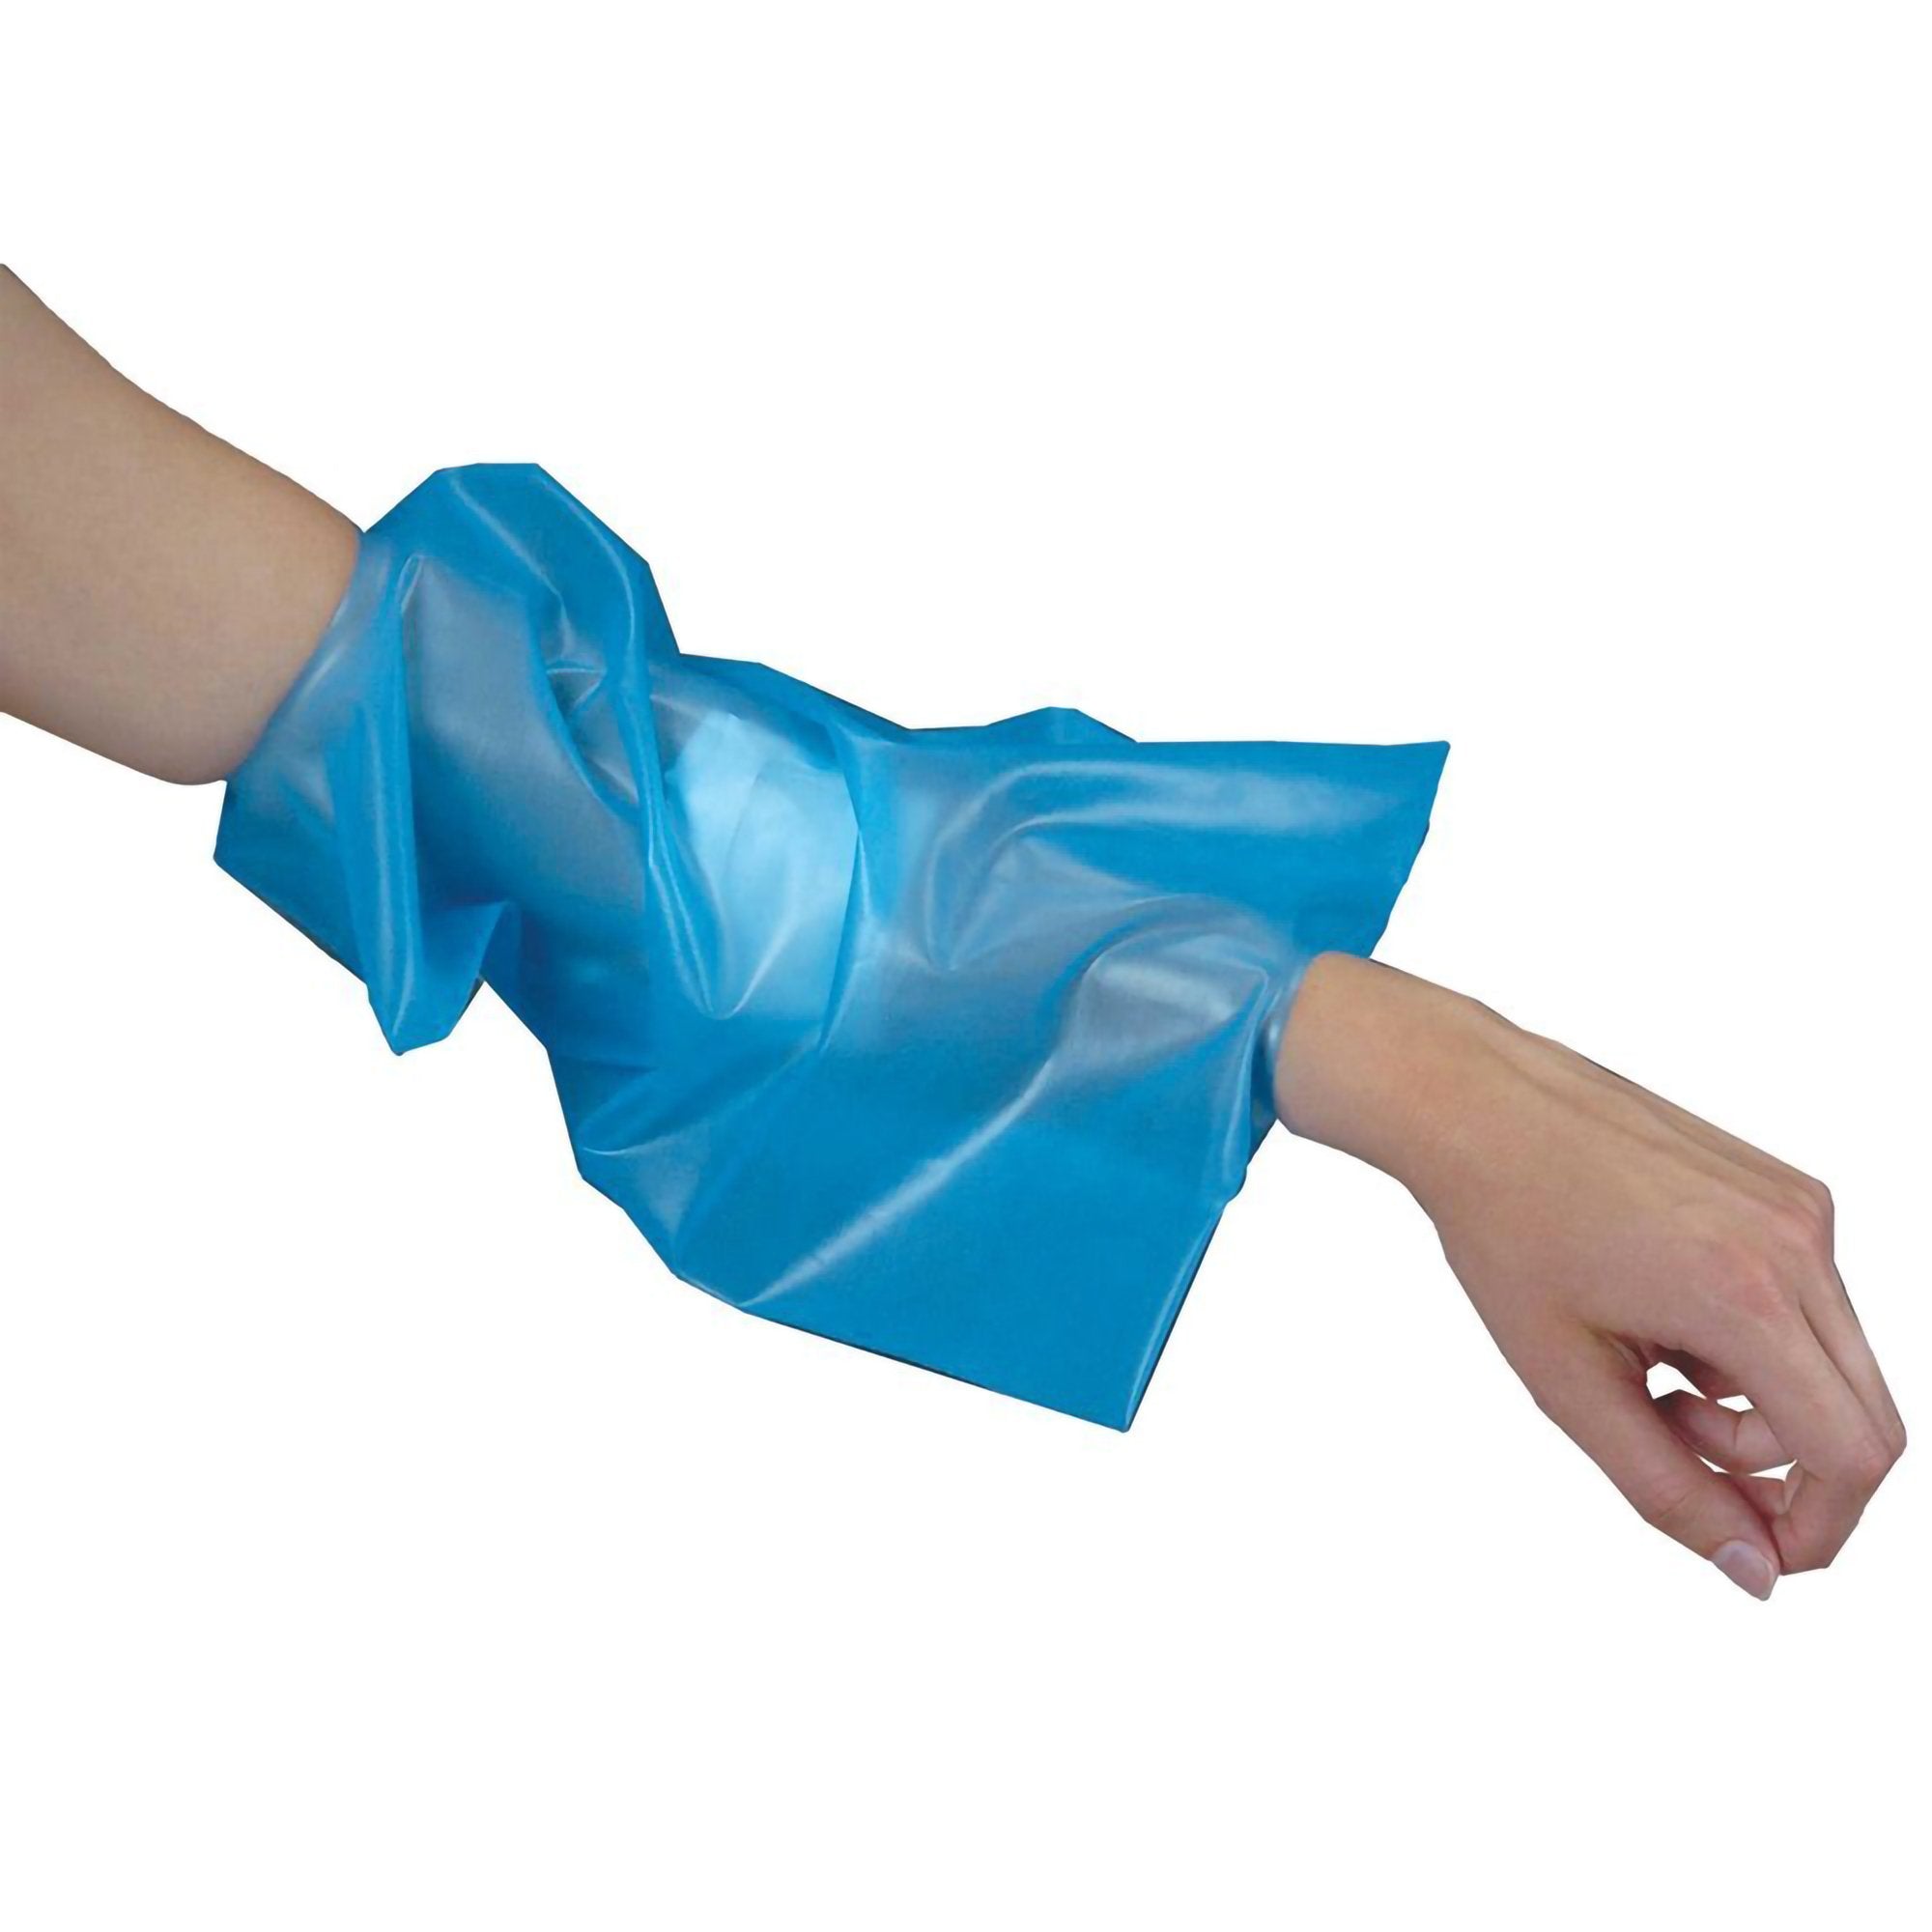 IV Site Barrier Protector SEAL-TIGHT® 10 to 15 Inch Upper Arm Circumference